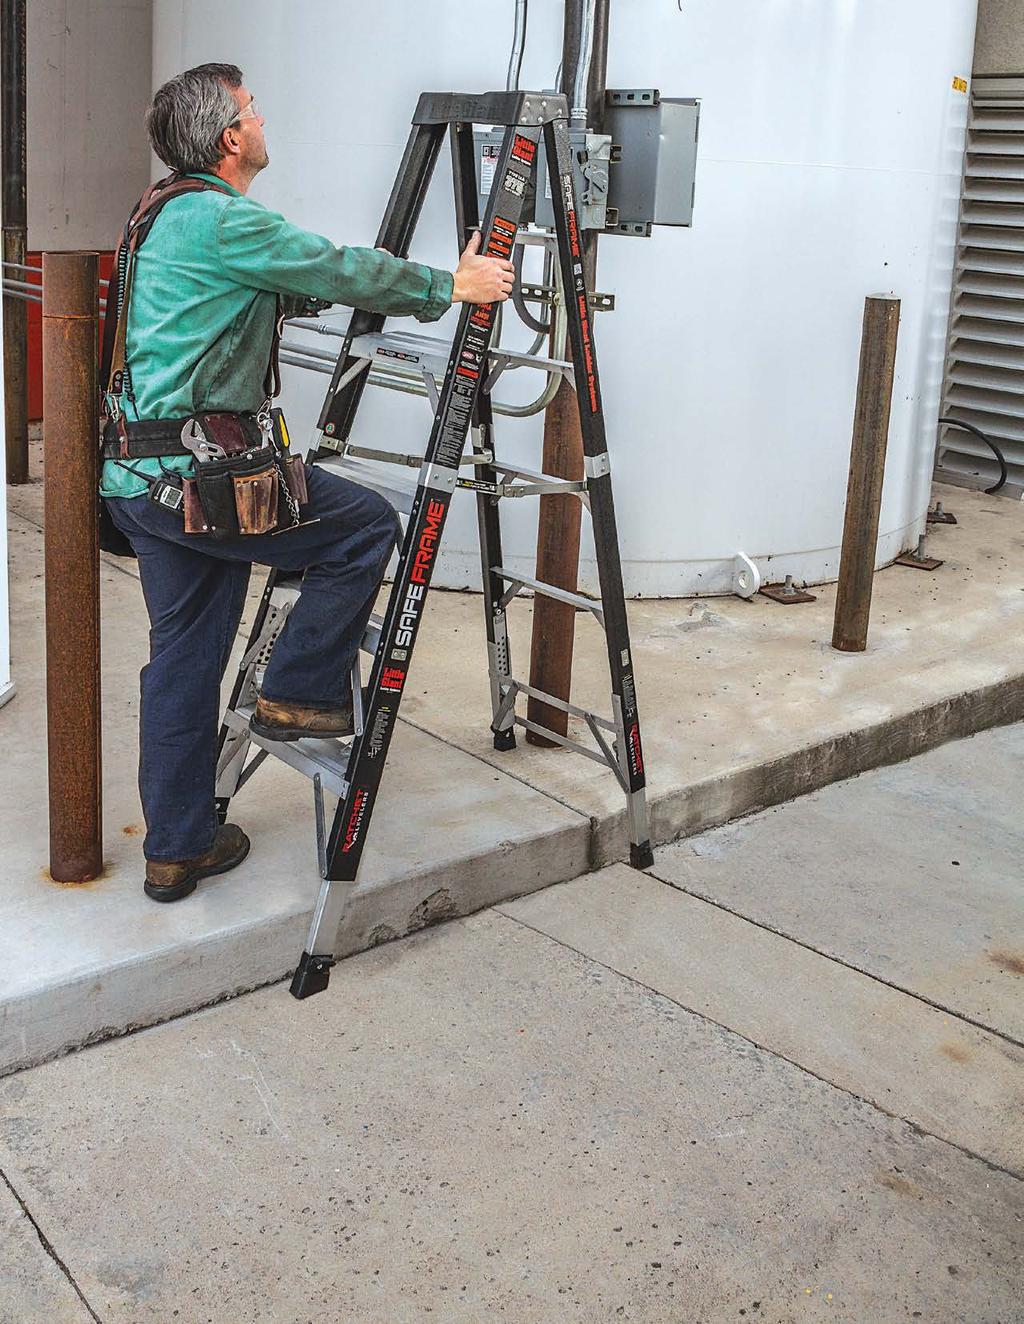 Injuries Caused By Missing the Bottom Rung Up to 20 percent of stepladder-related injuries happen